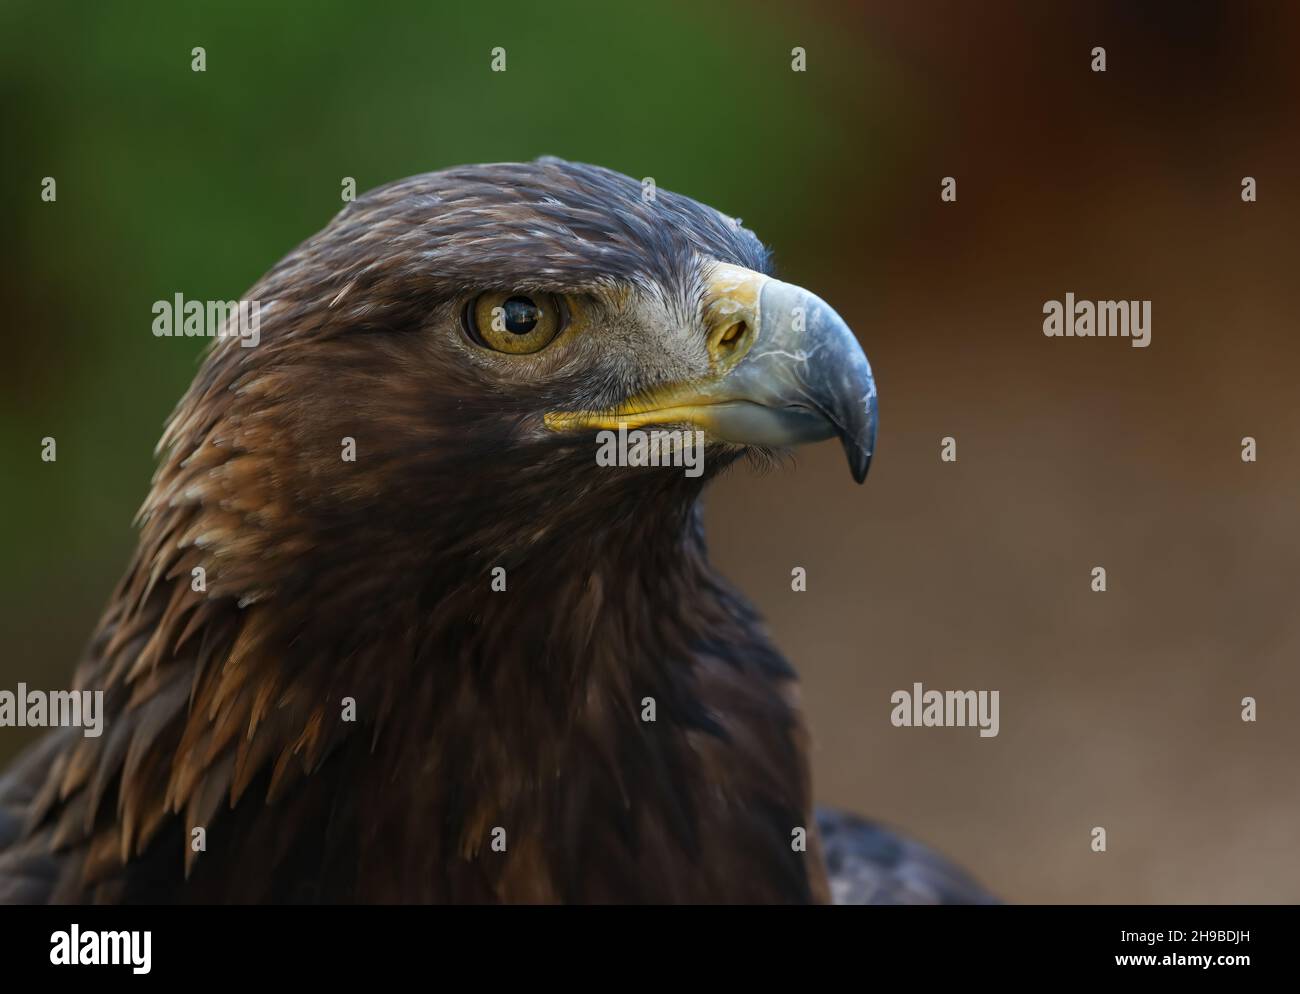 close up of golden eagle head Stock Photo